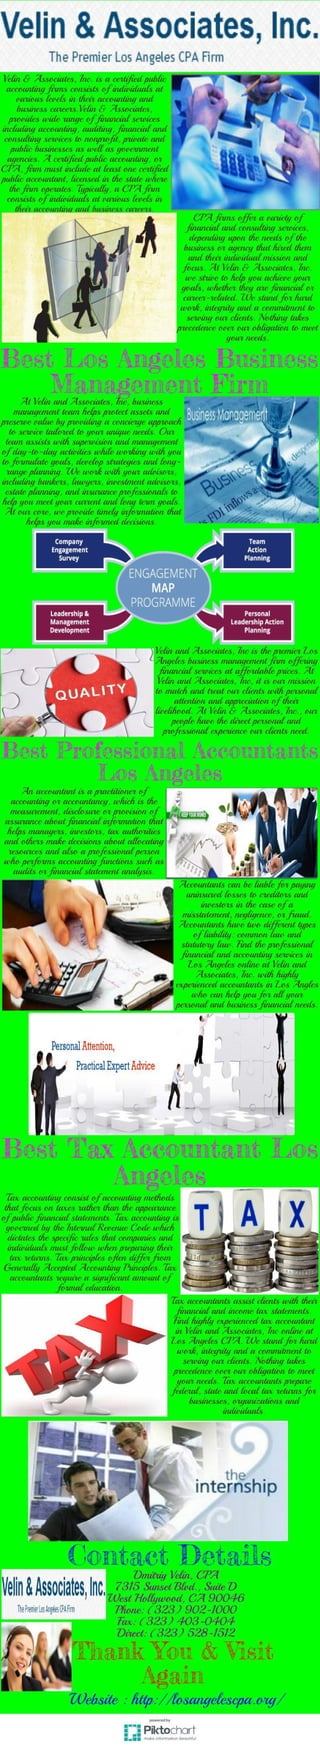 Best tax-accountant-firms-in-los-angeles